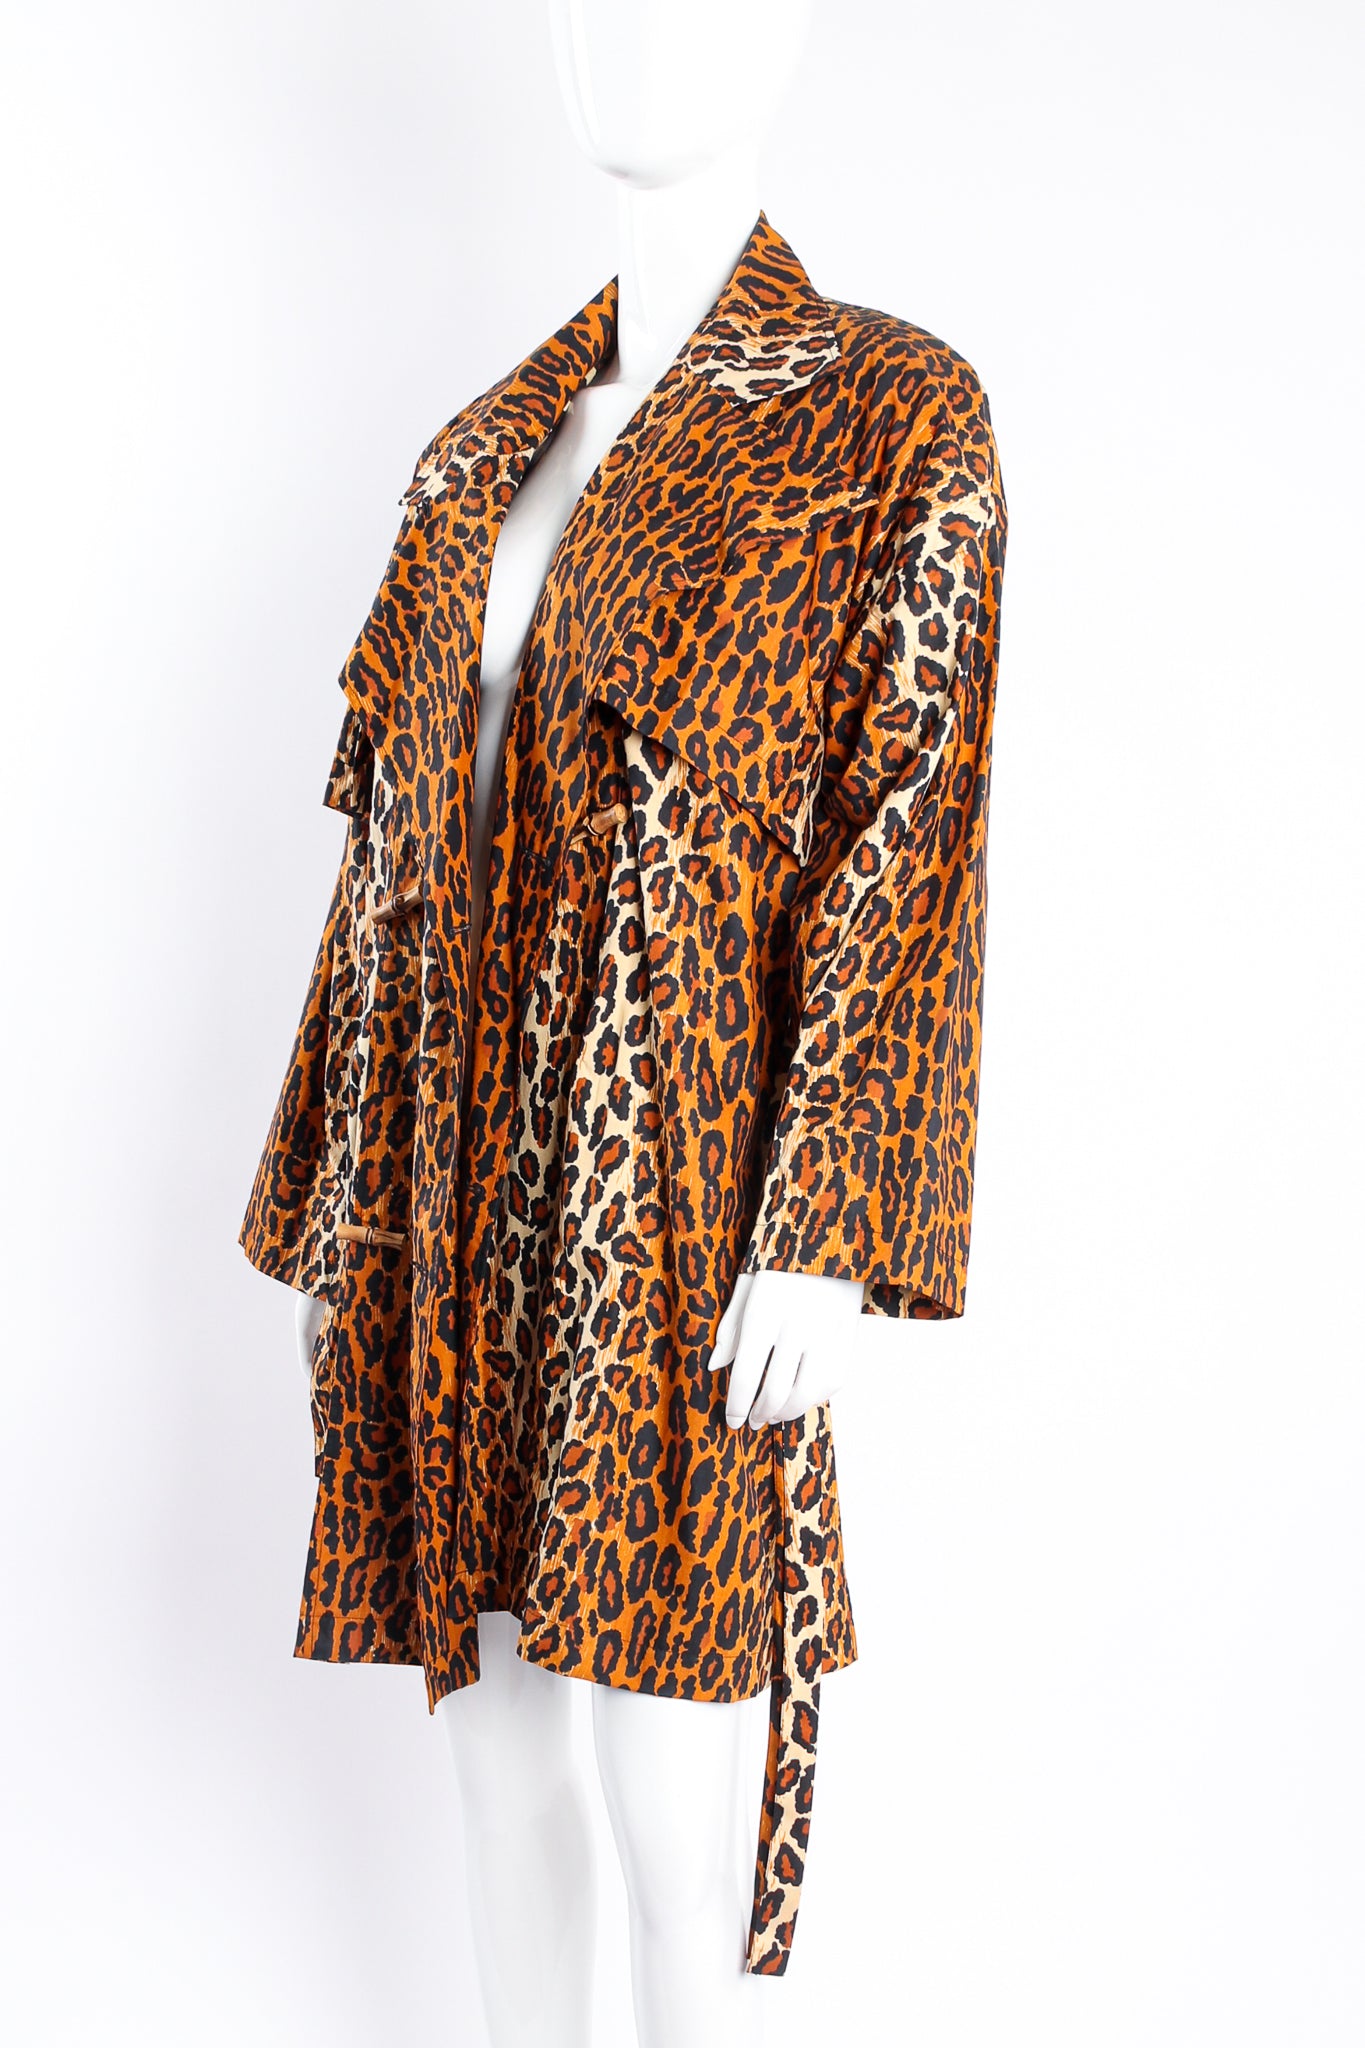 Vintage Patrick Kelly SS 1989 Runway Leopard Trench Coat on Mannequin open at Recess Los Angeles